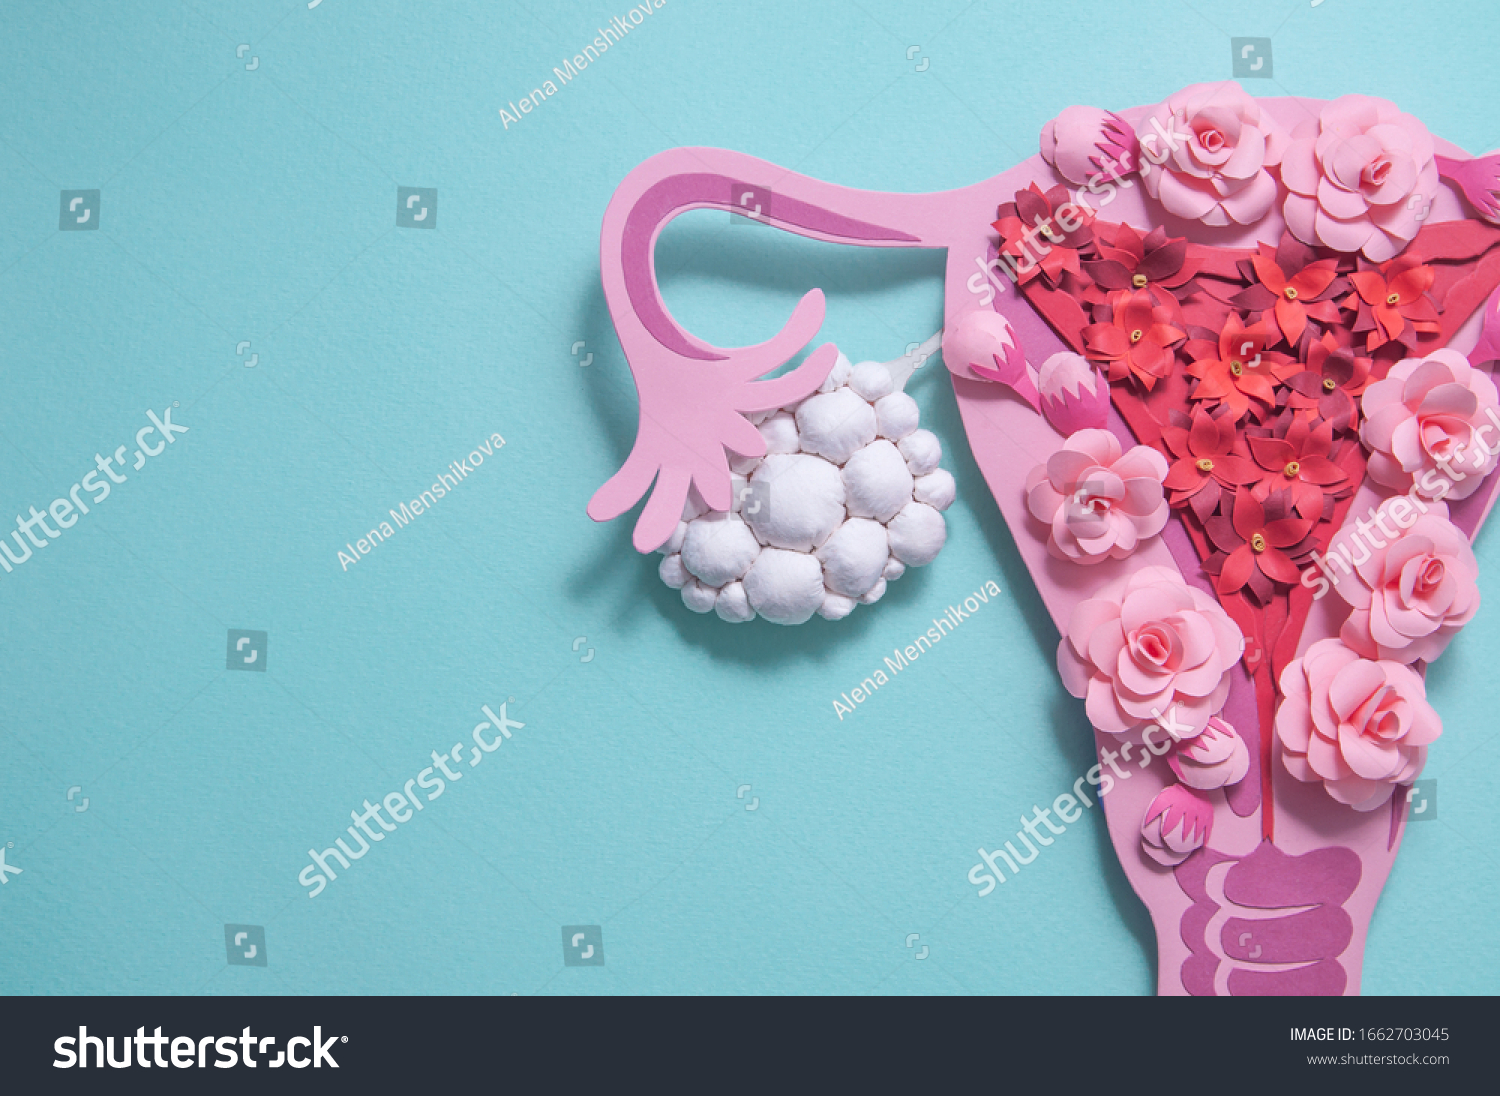 Concept polycystic ovary syndrome, PCOS awareness. Women reproductive system. Paper sculpture with flowers, copyspace #1662703045